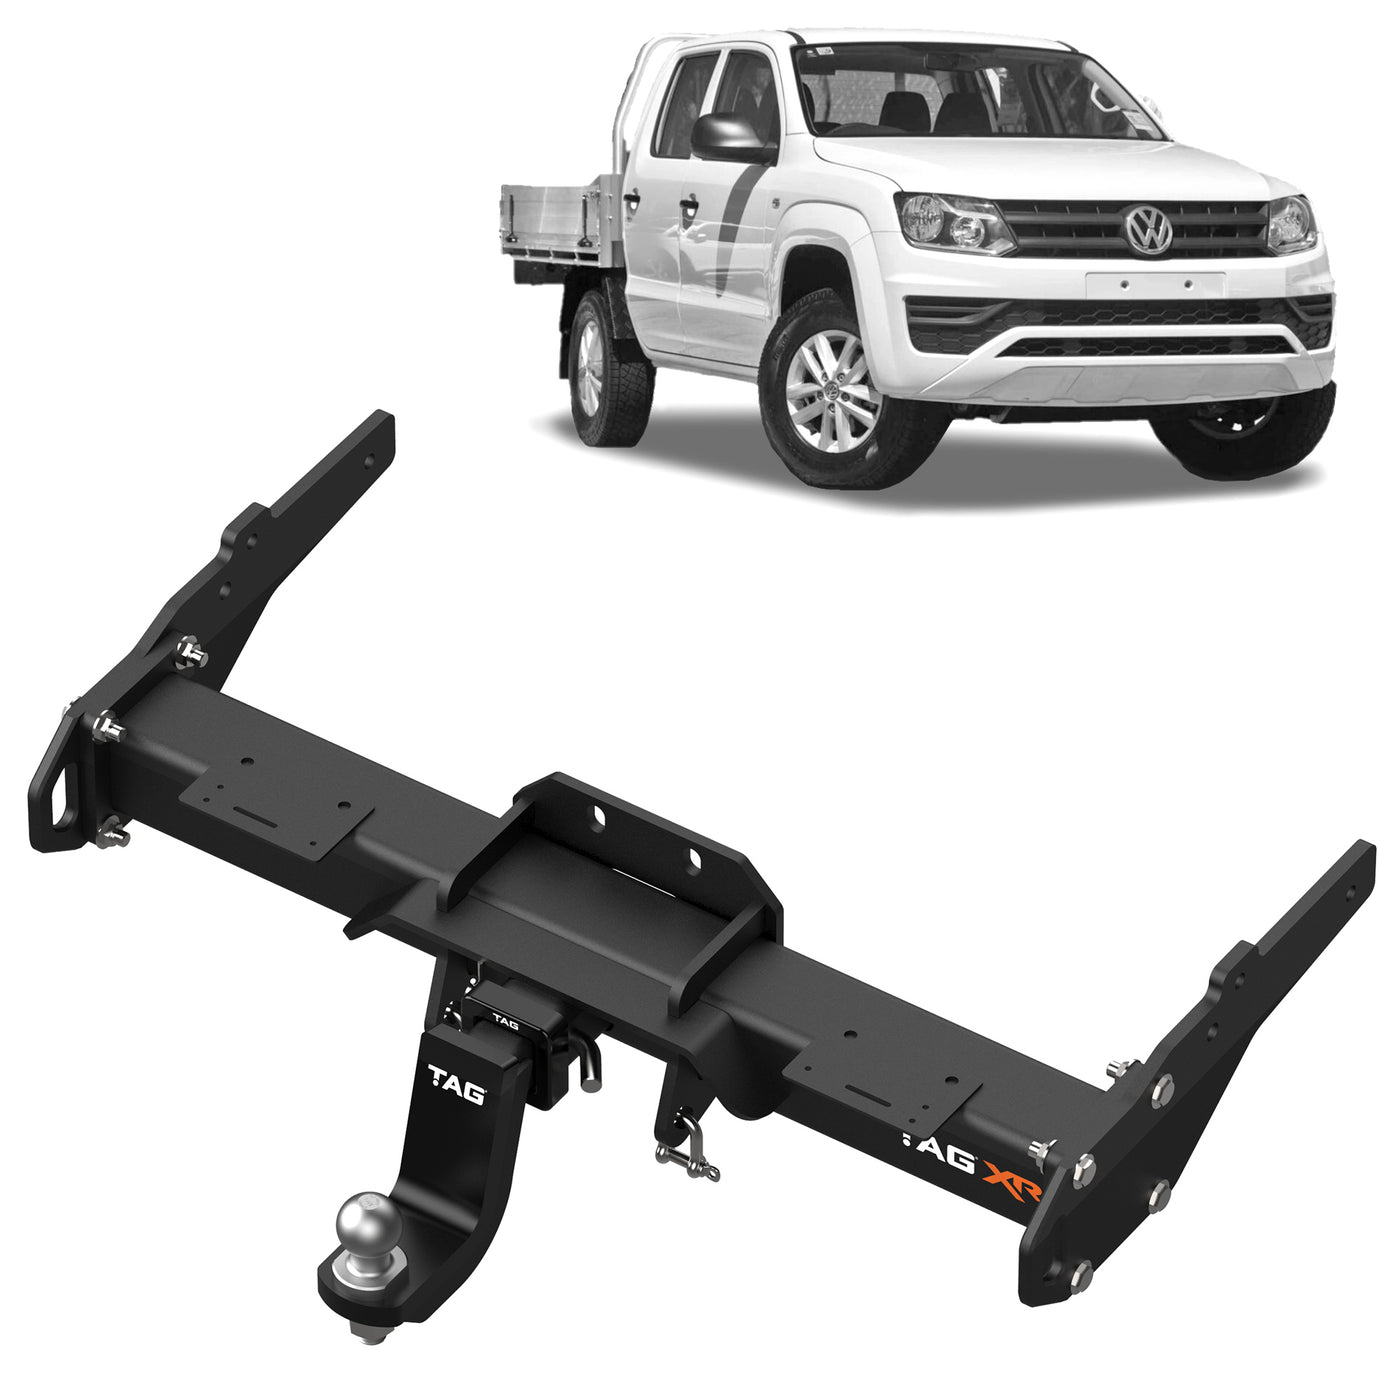 TAG 4x4 Recovery Towbar for Volkswagen Amarok (09/2016 - on), Volkswagen Amarok (09/2011 - on) - OZI4X4 PTY LTD